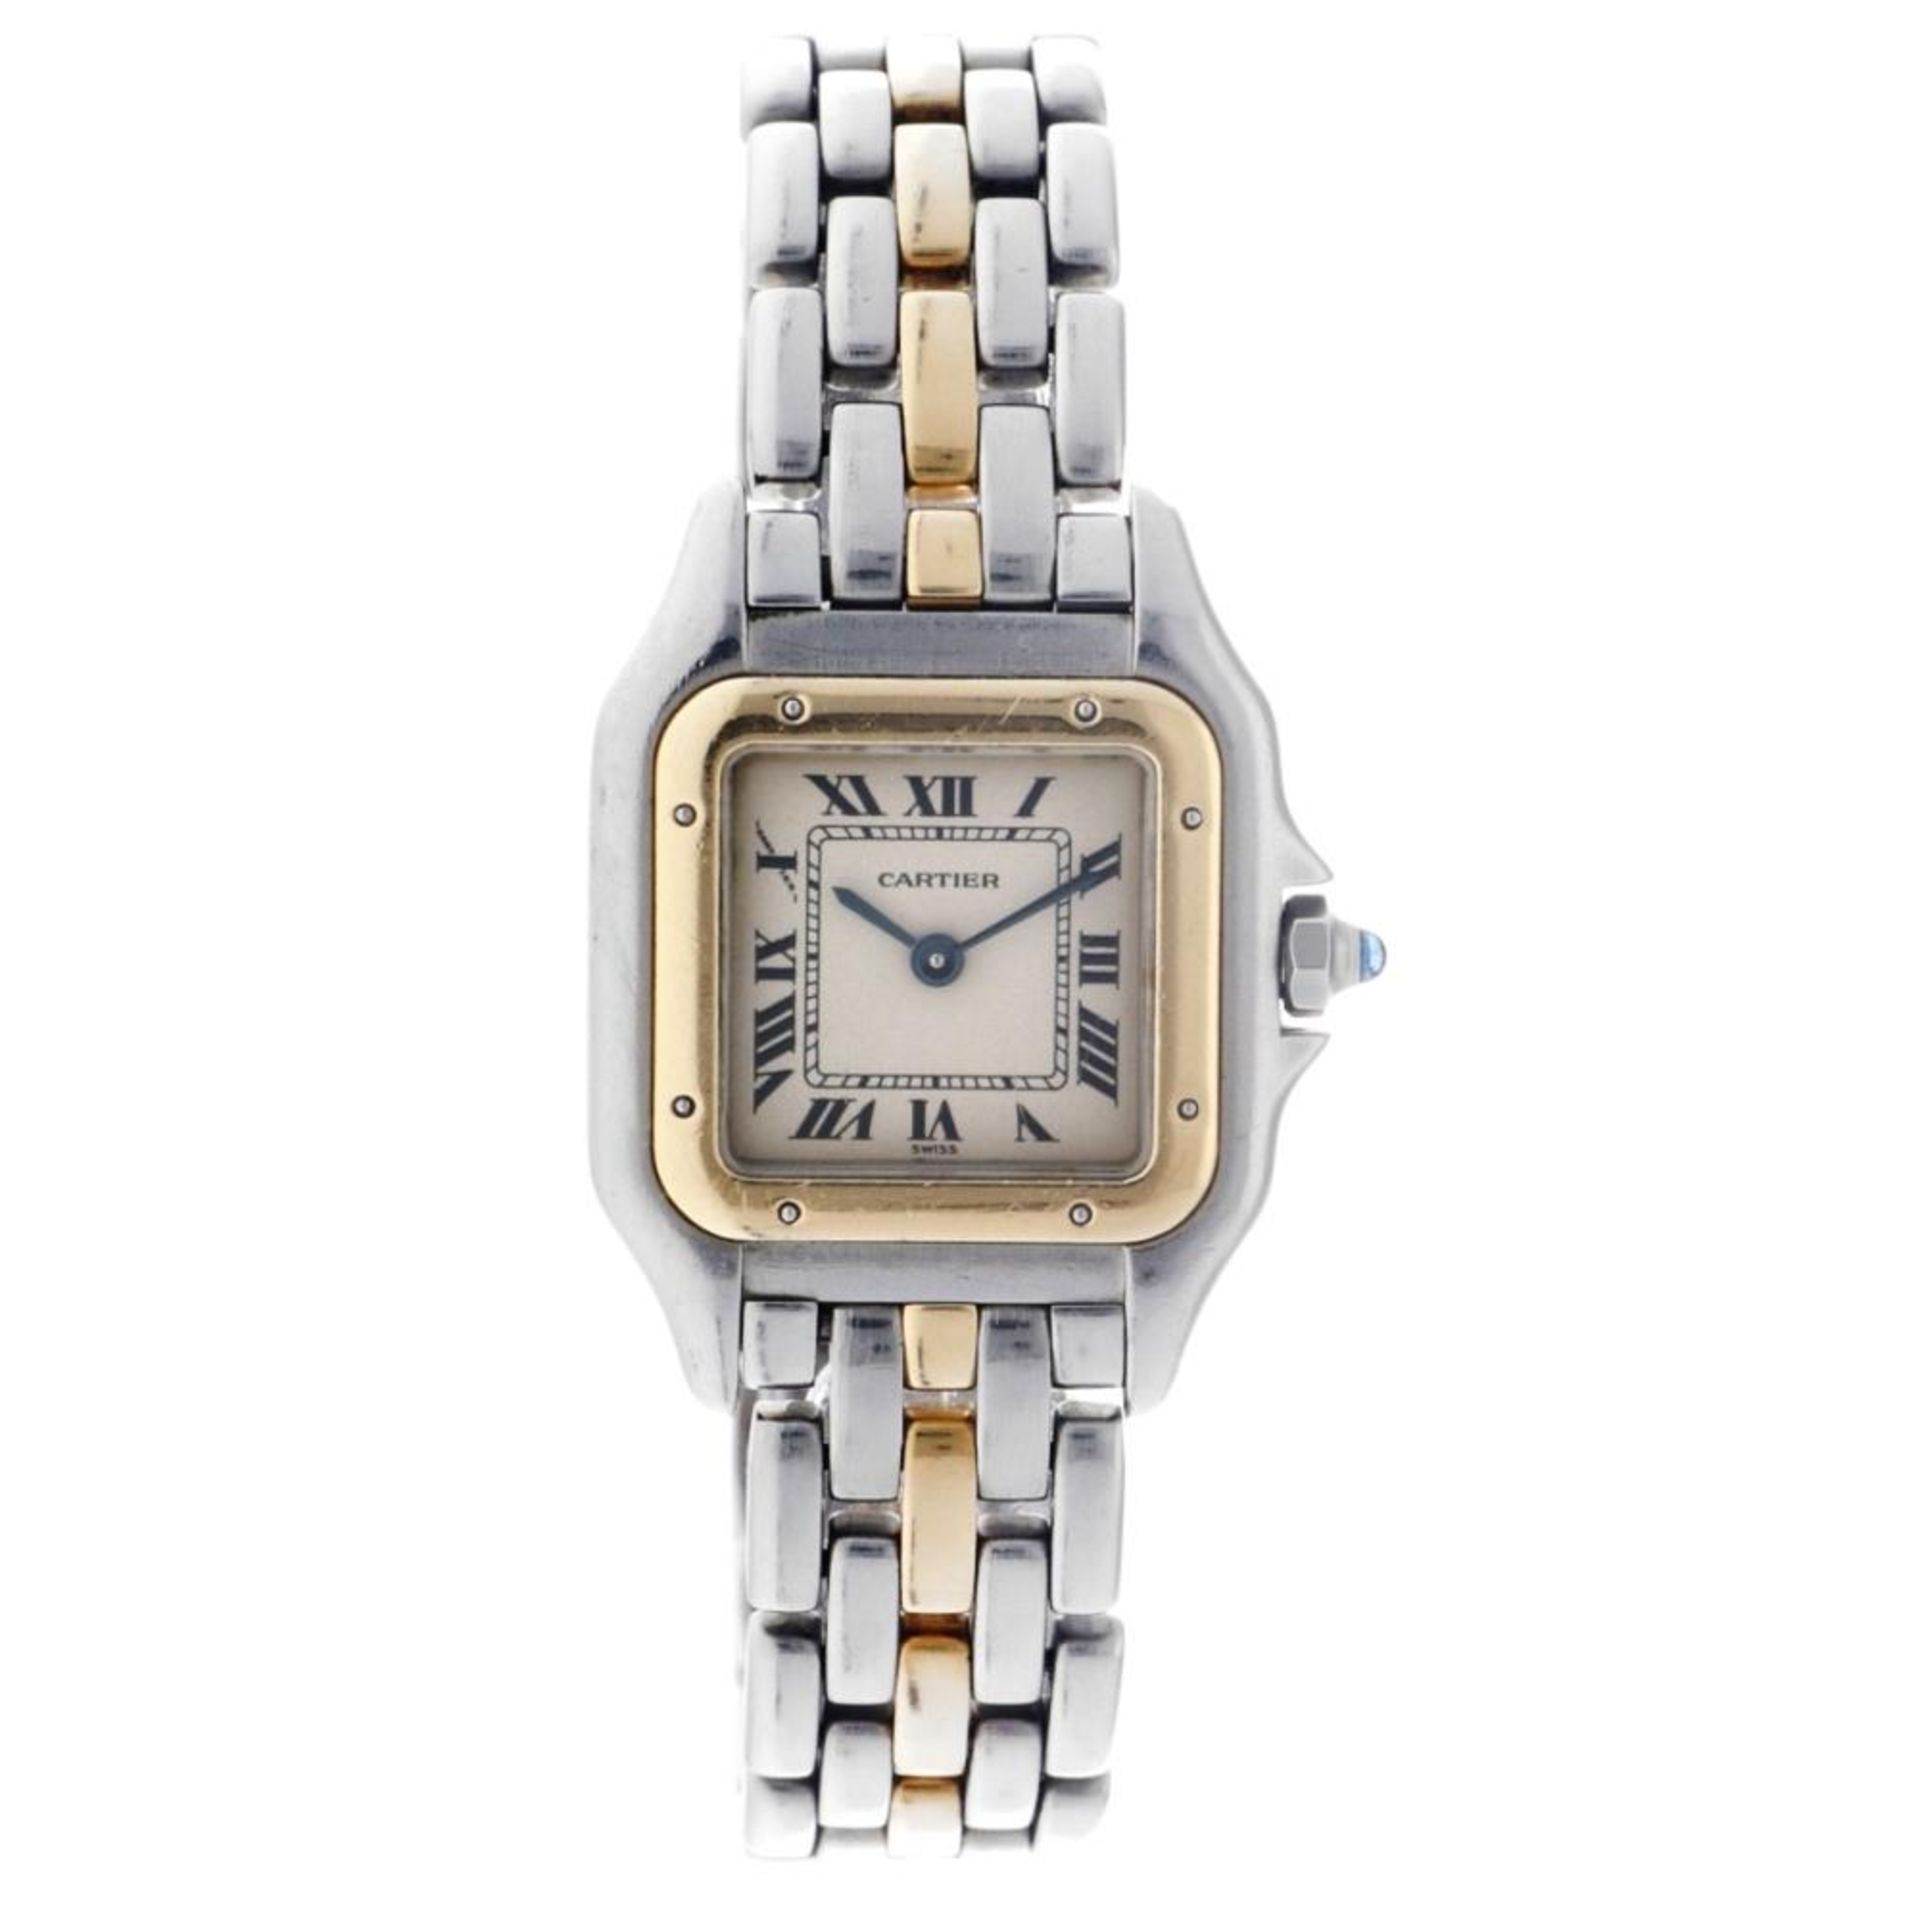 Cartier Panthere 166921 - Ladies watch - approx. 1989.